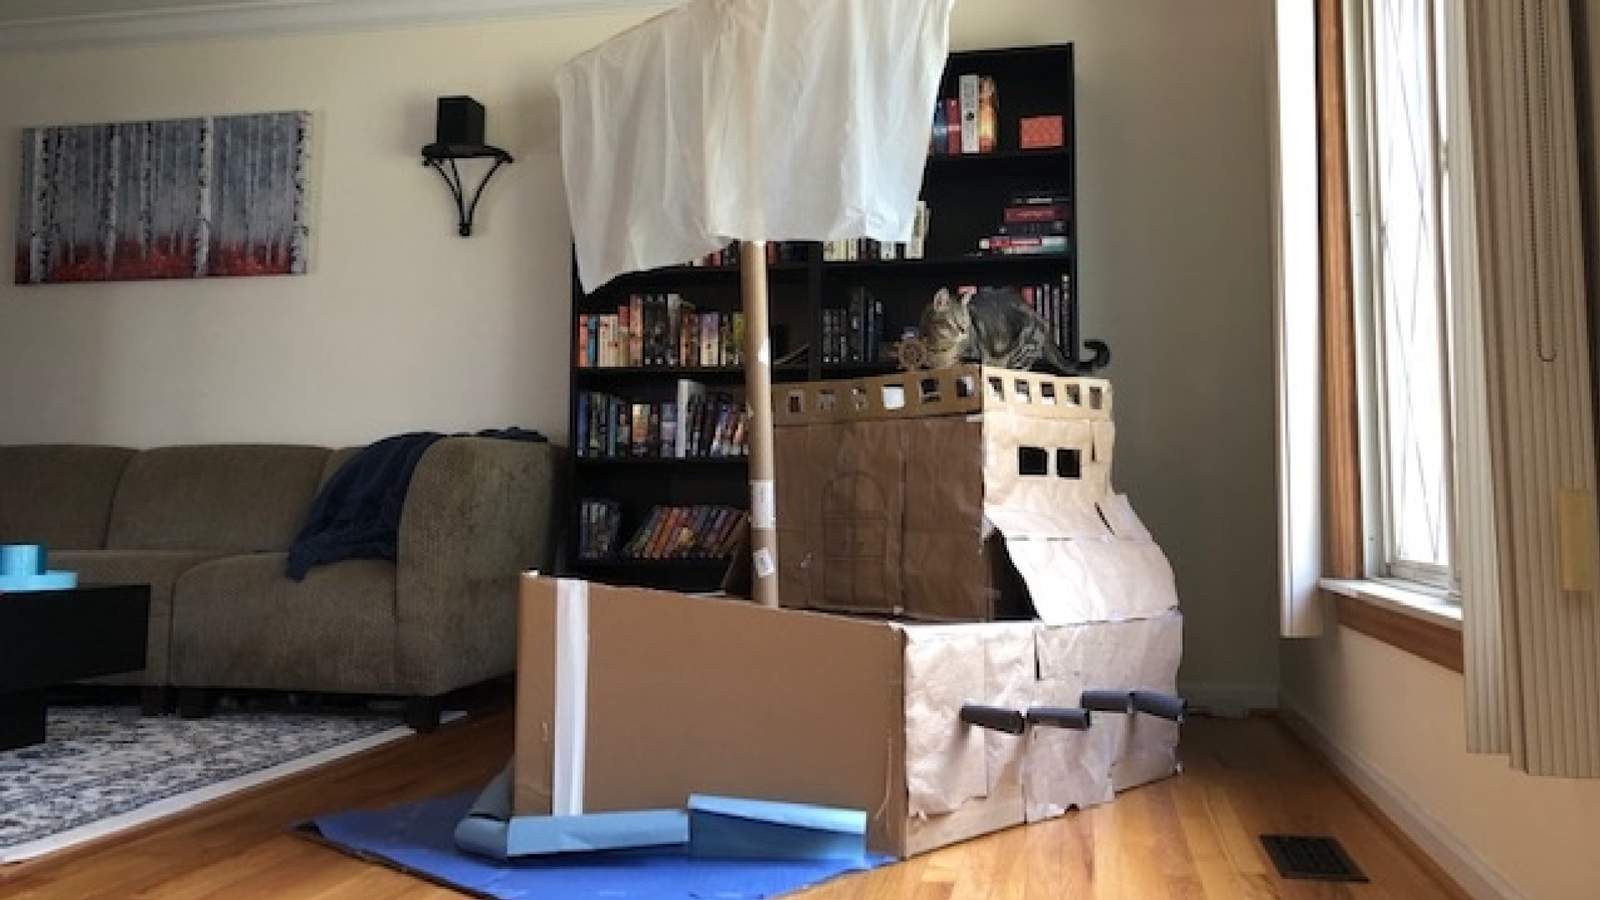 Heres the purr-fect thing you can do with all those old boxes!